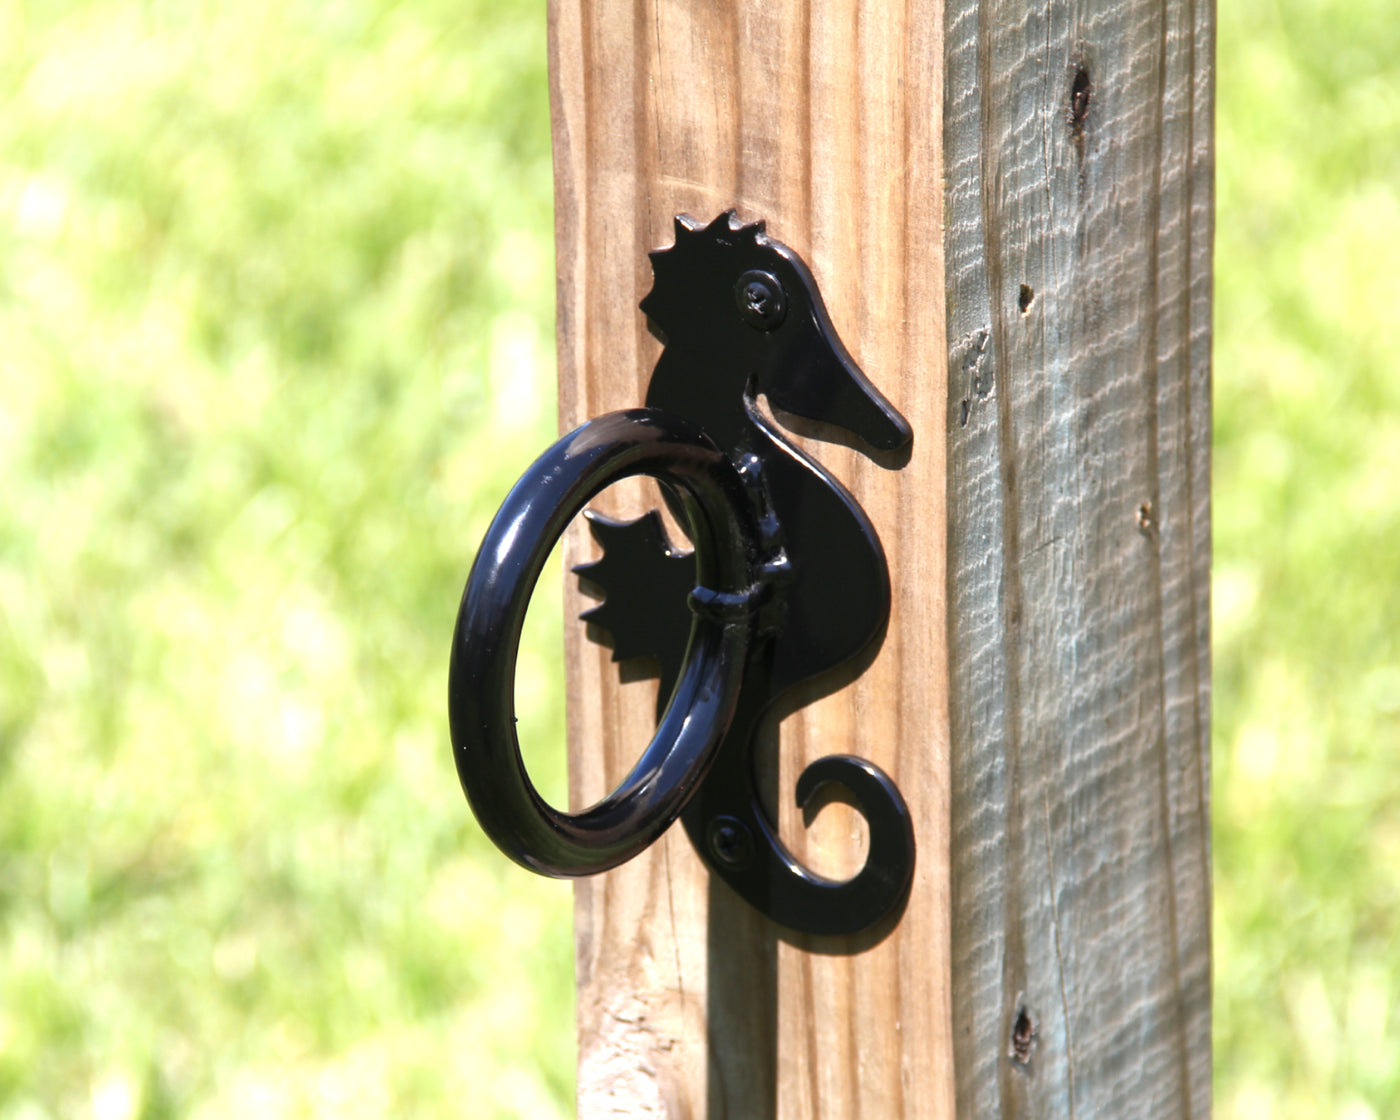 Seahorse Nautical Rope Holder for 2" Rope Fence - Madison Iron and Wood - Post Cap - metal outdoor decor - Steel deocrations - american made products - veteran owned business products - fencing decorations - fencing supplies - custom wall decorations - personalized wall signs - steel - decorative post caps - steel post caps - metal post caps - brackets - structural brackets - home improvement - easter - easter decorations - easter gift - easter yard decor